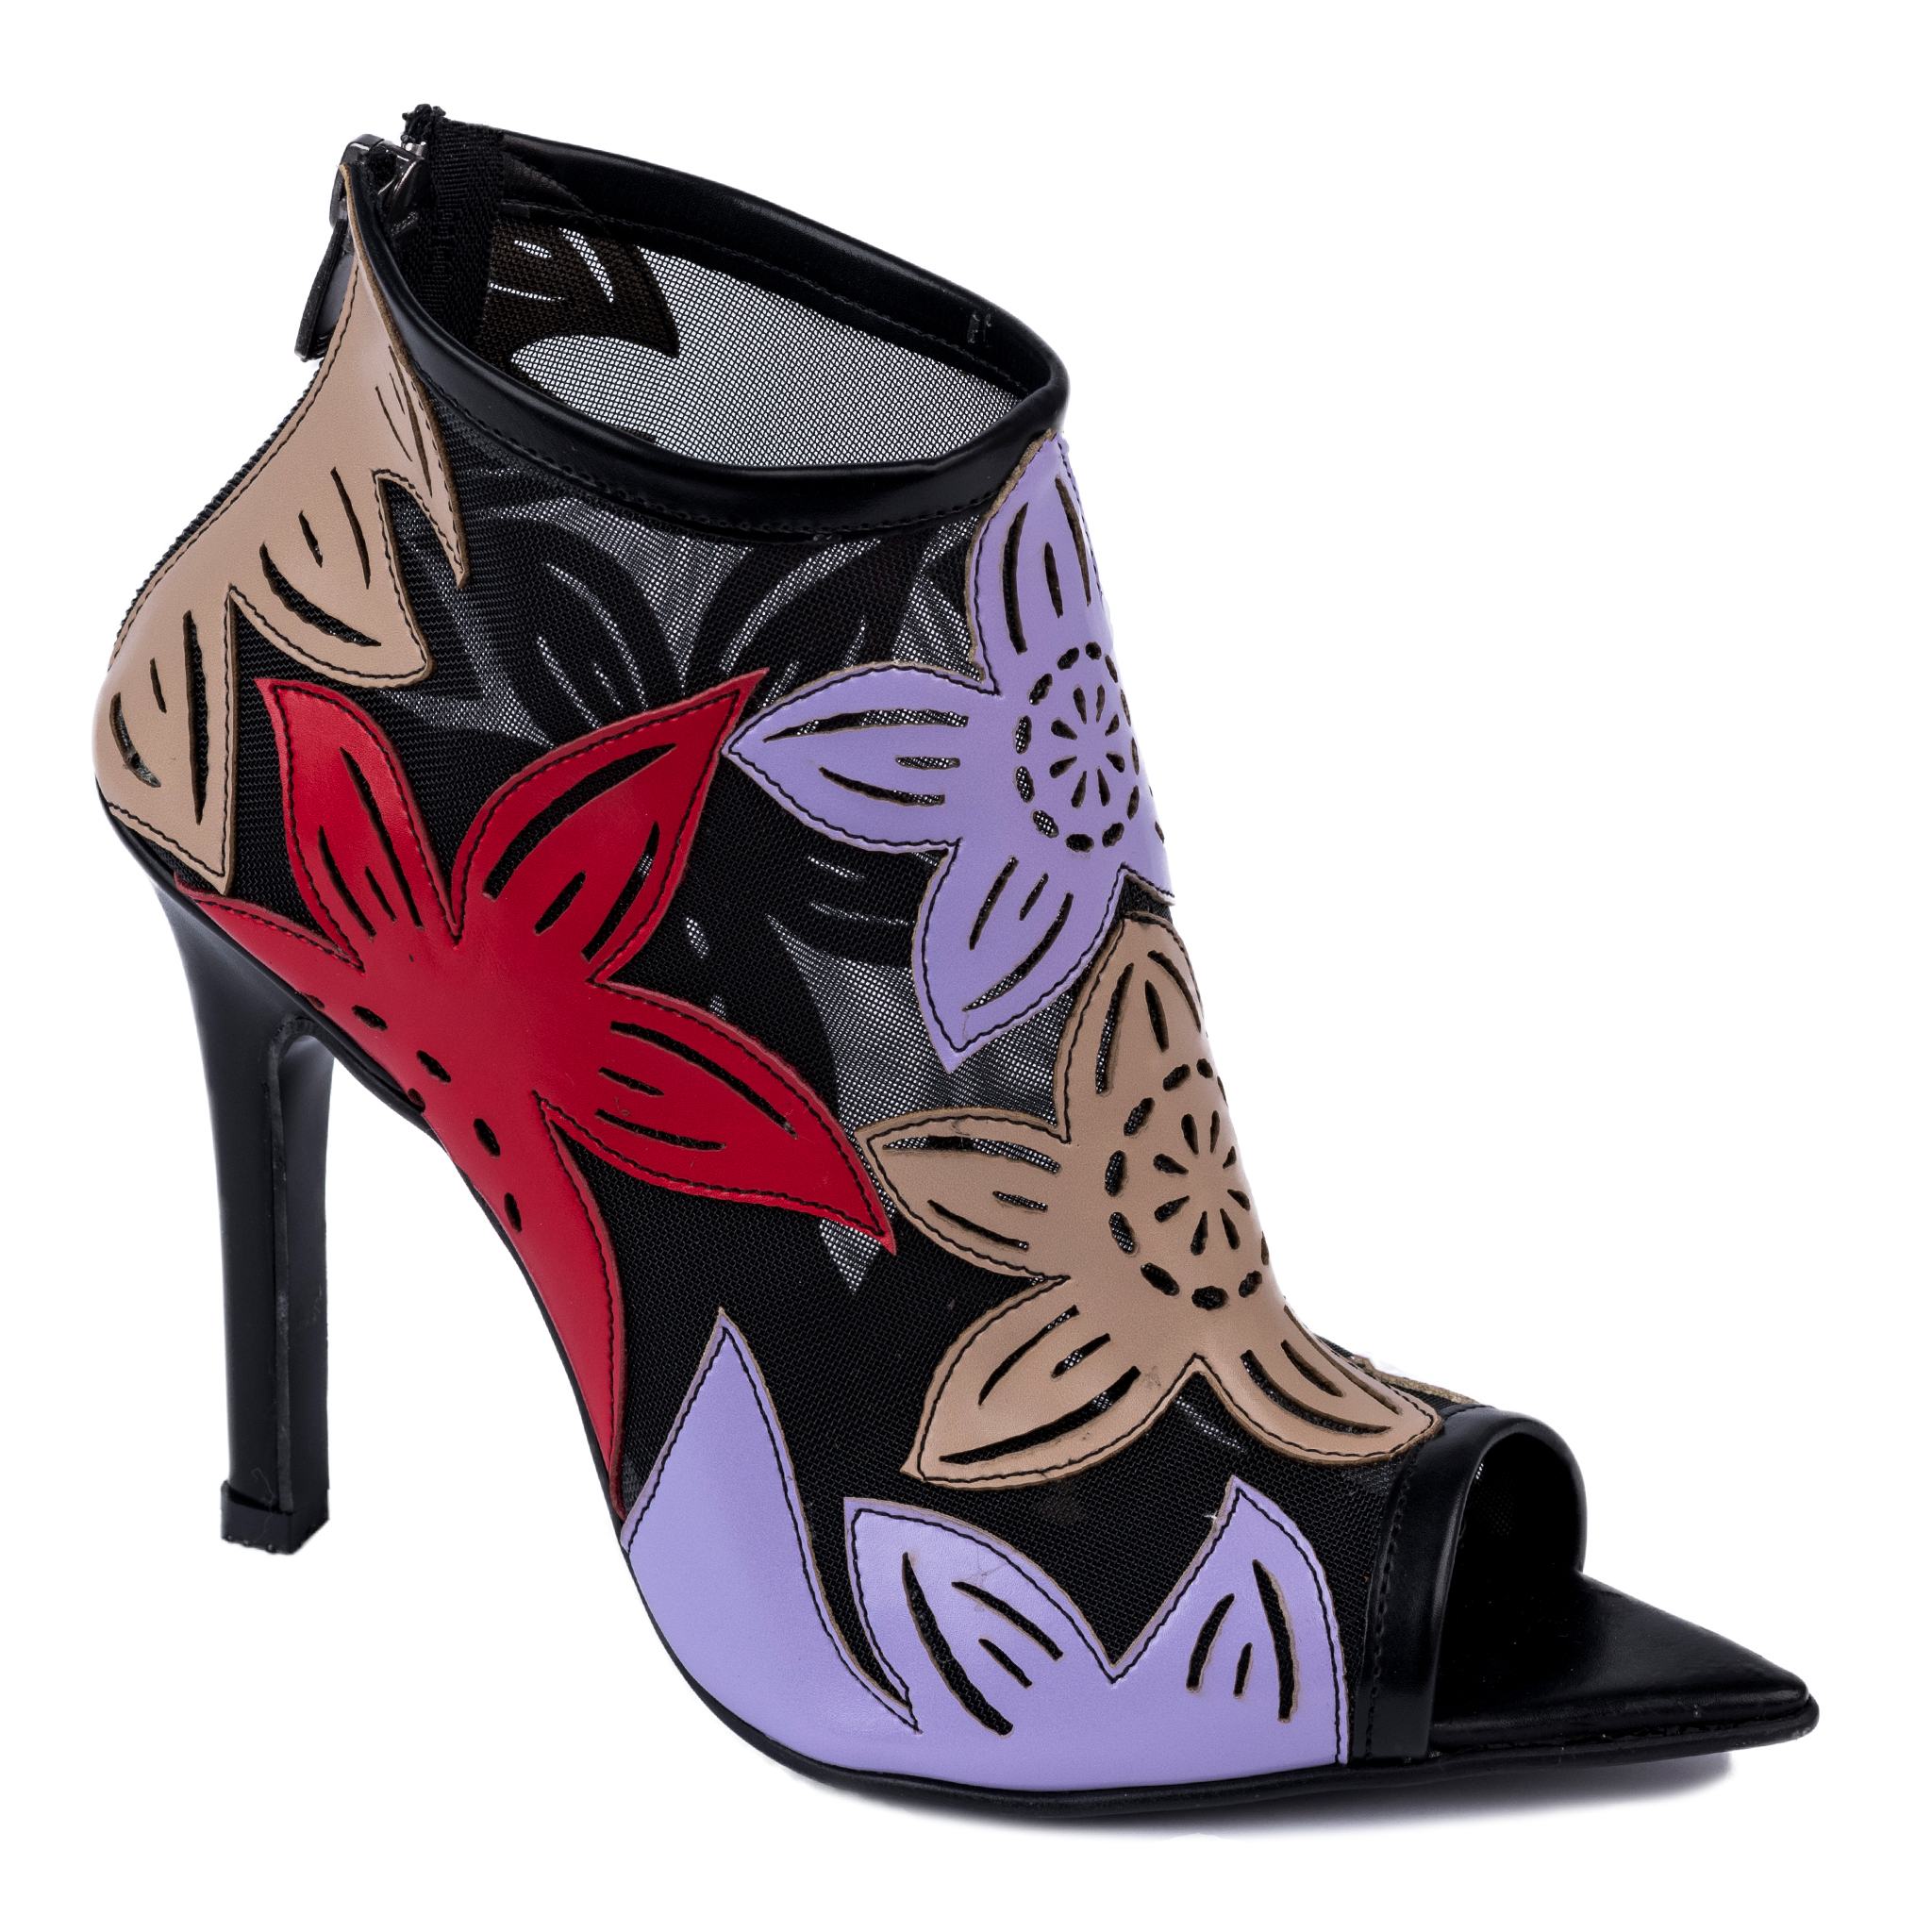 FLOWER PRINT SUMMER ANKLE BOOTS WITH THIN HEEL - BLACK